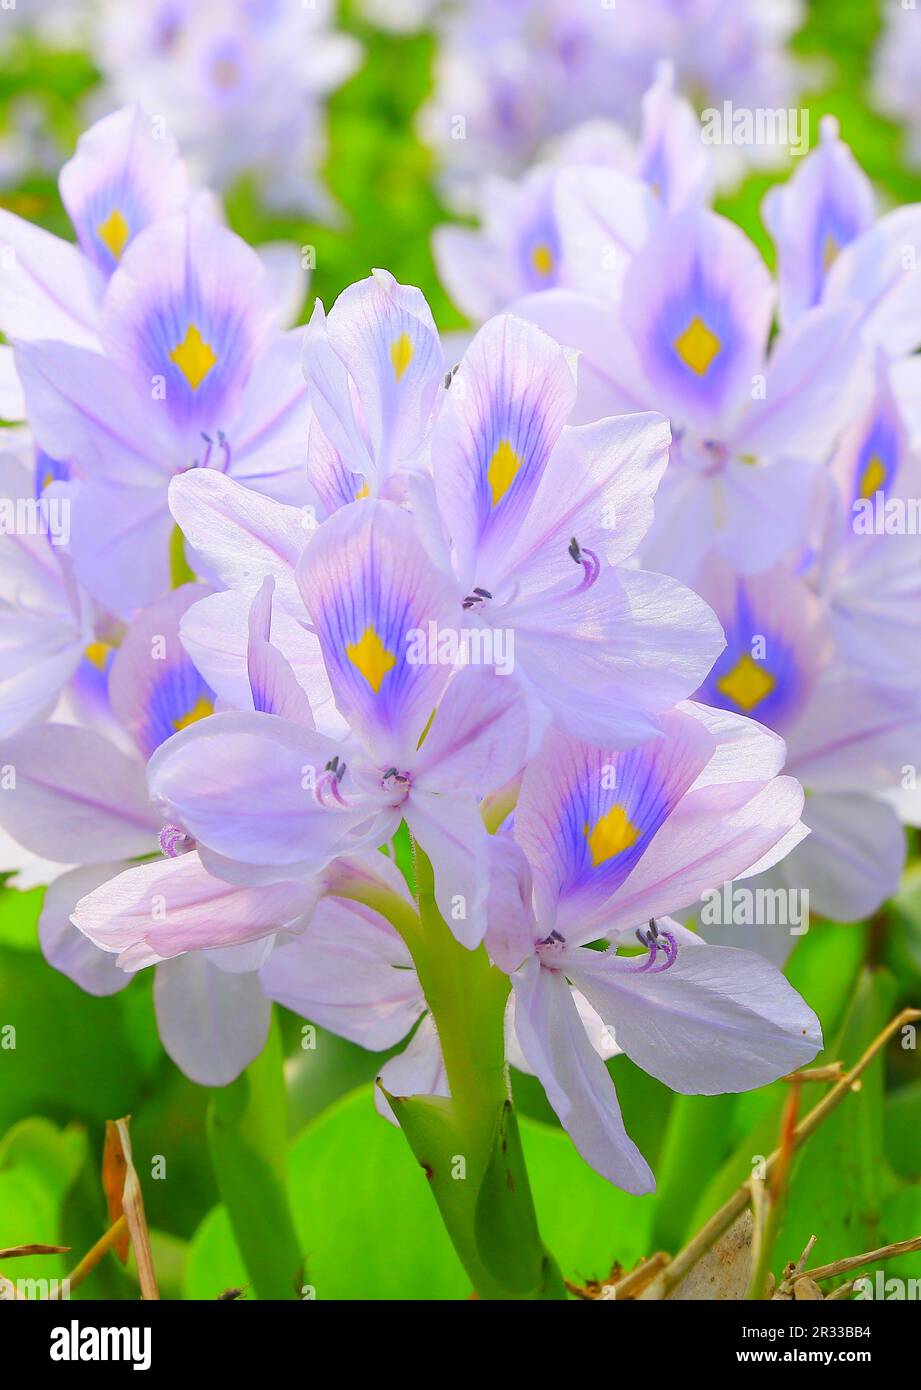 most beautiful and colourful flower in Bangladesh water hyacinth flower Stock Photo